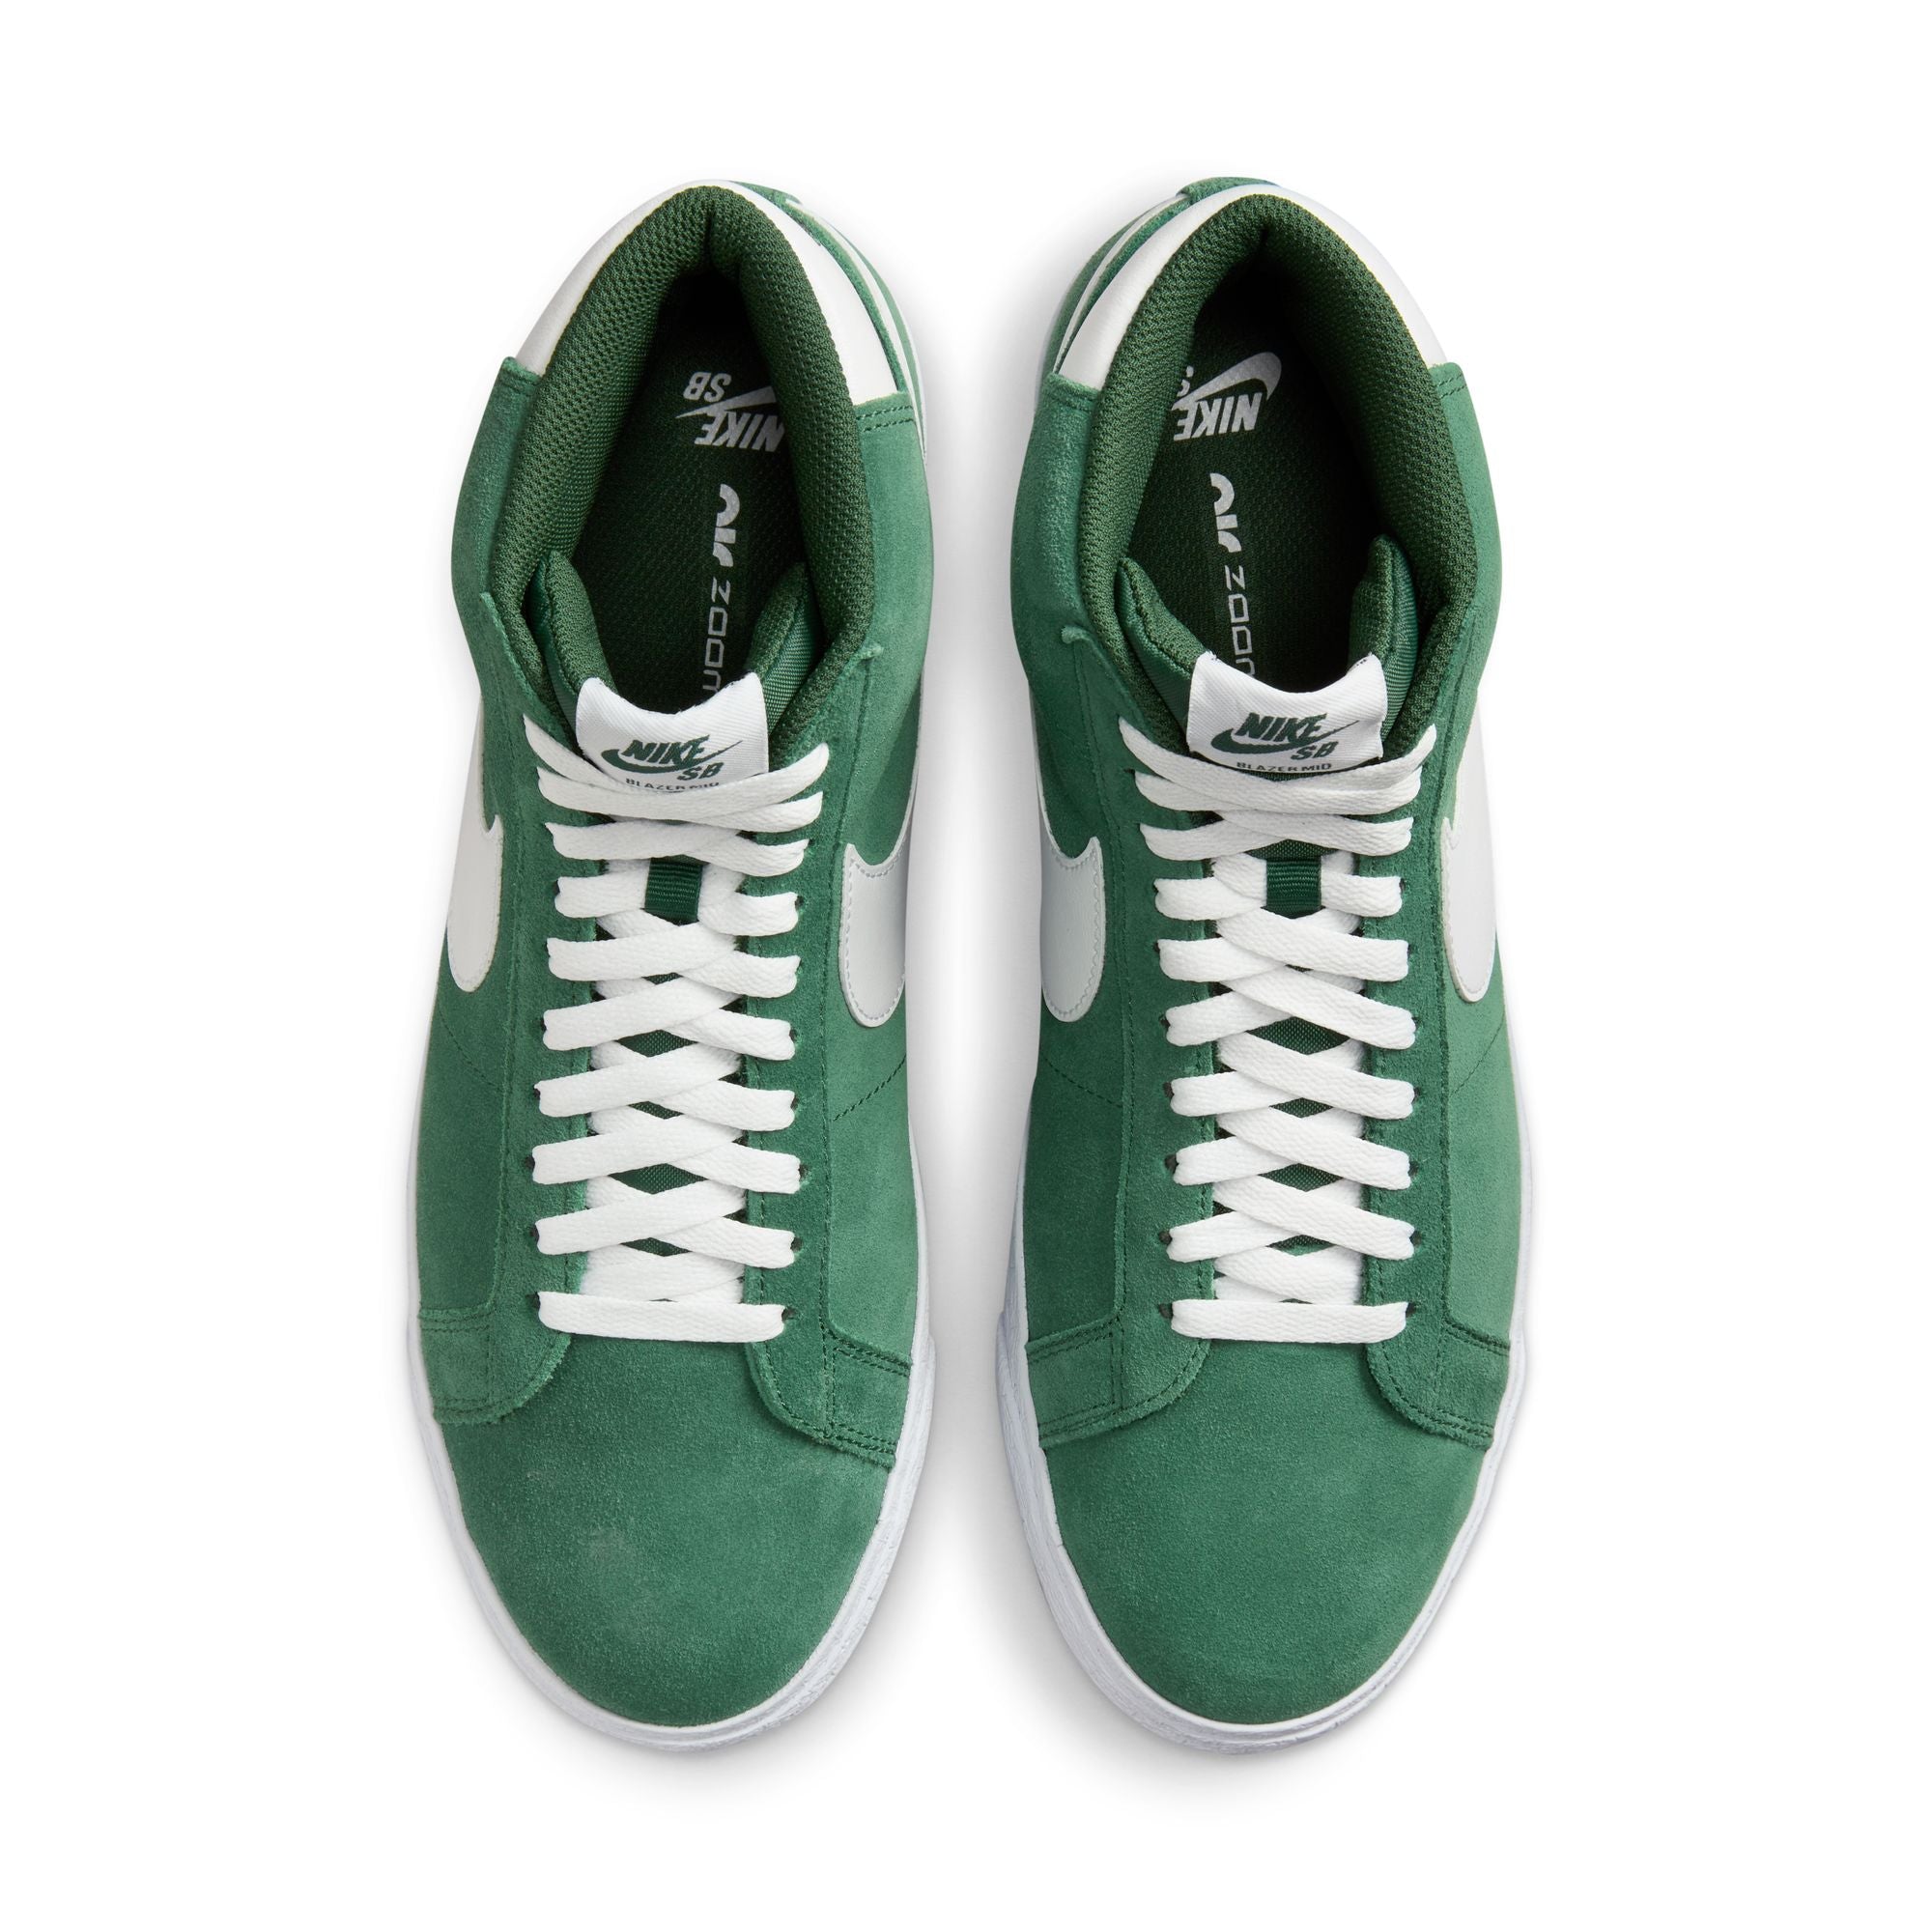 Mid top Nike SB Blazer Mid skate shoes, in Fir Green colourway with white Nike swoosh on sides.